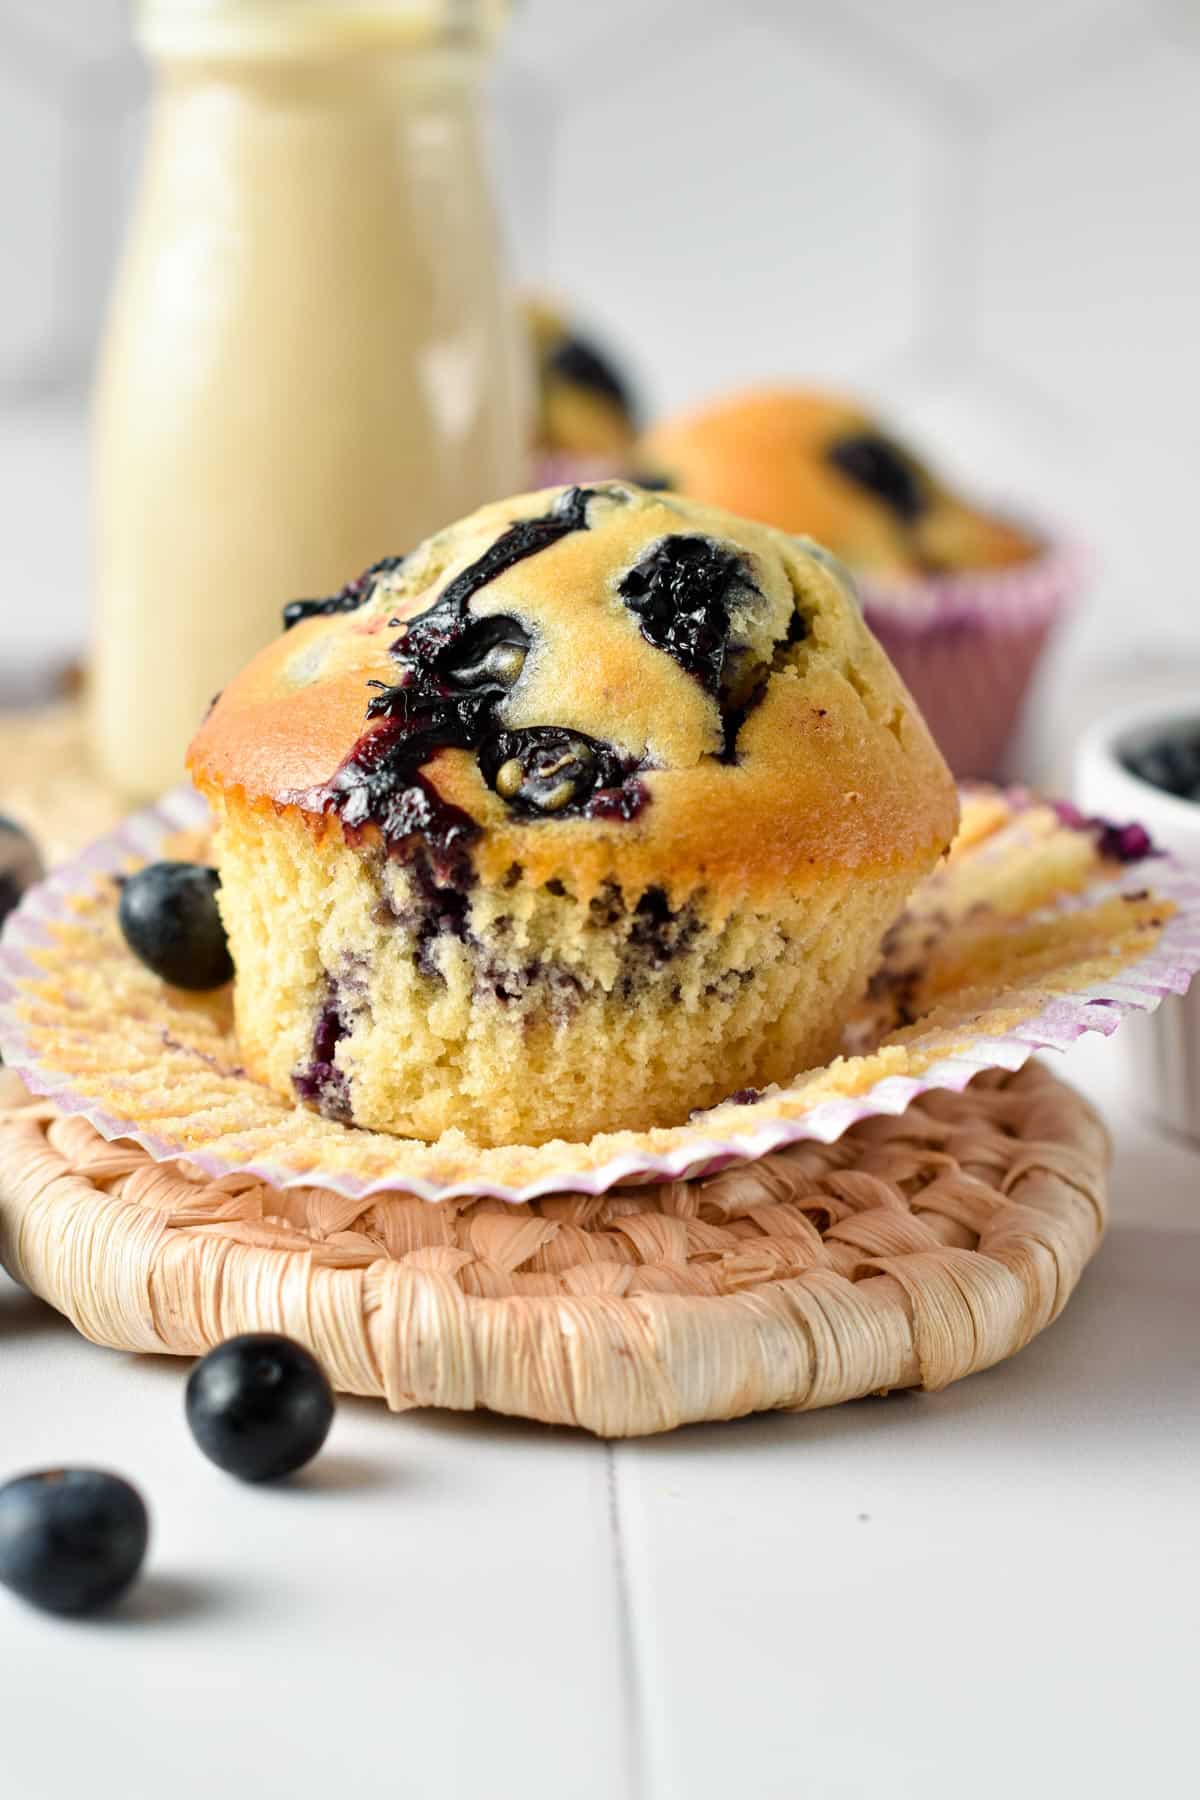 These Eggless Blueberry Muffins are easy, egg-free blueberry muffins with the most fluffy texture filled with Juicy blueberries.